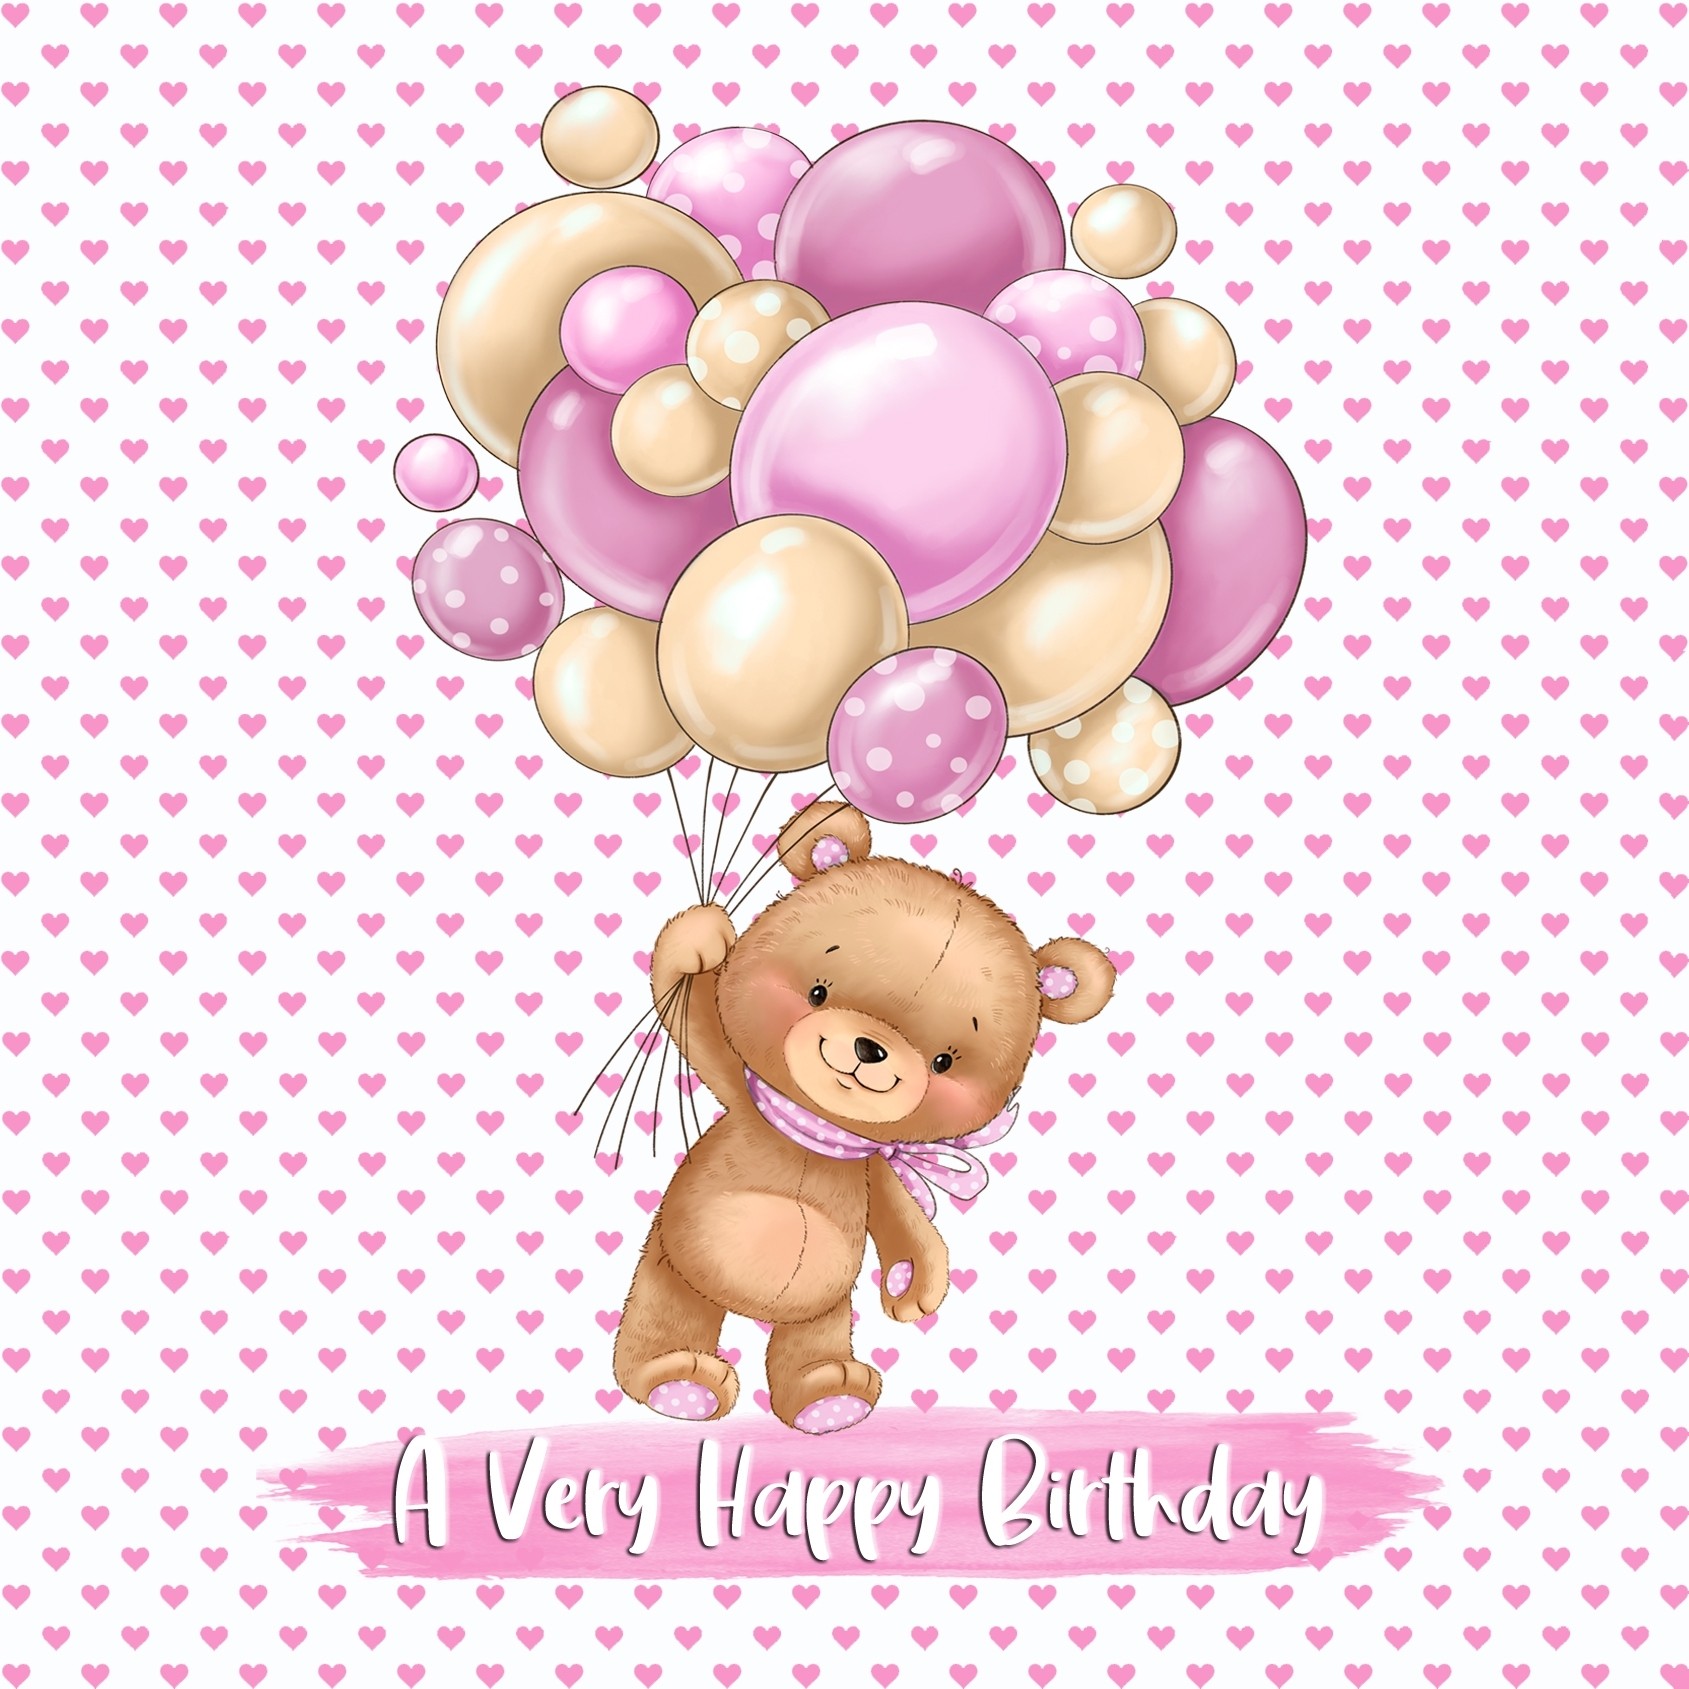 Happy Birthday Greeting Card (Square, Pink)